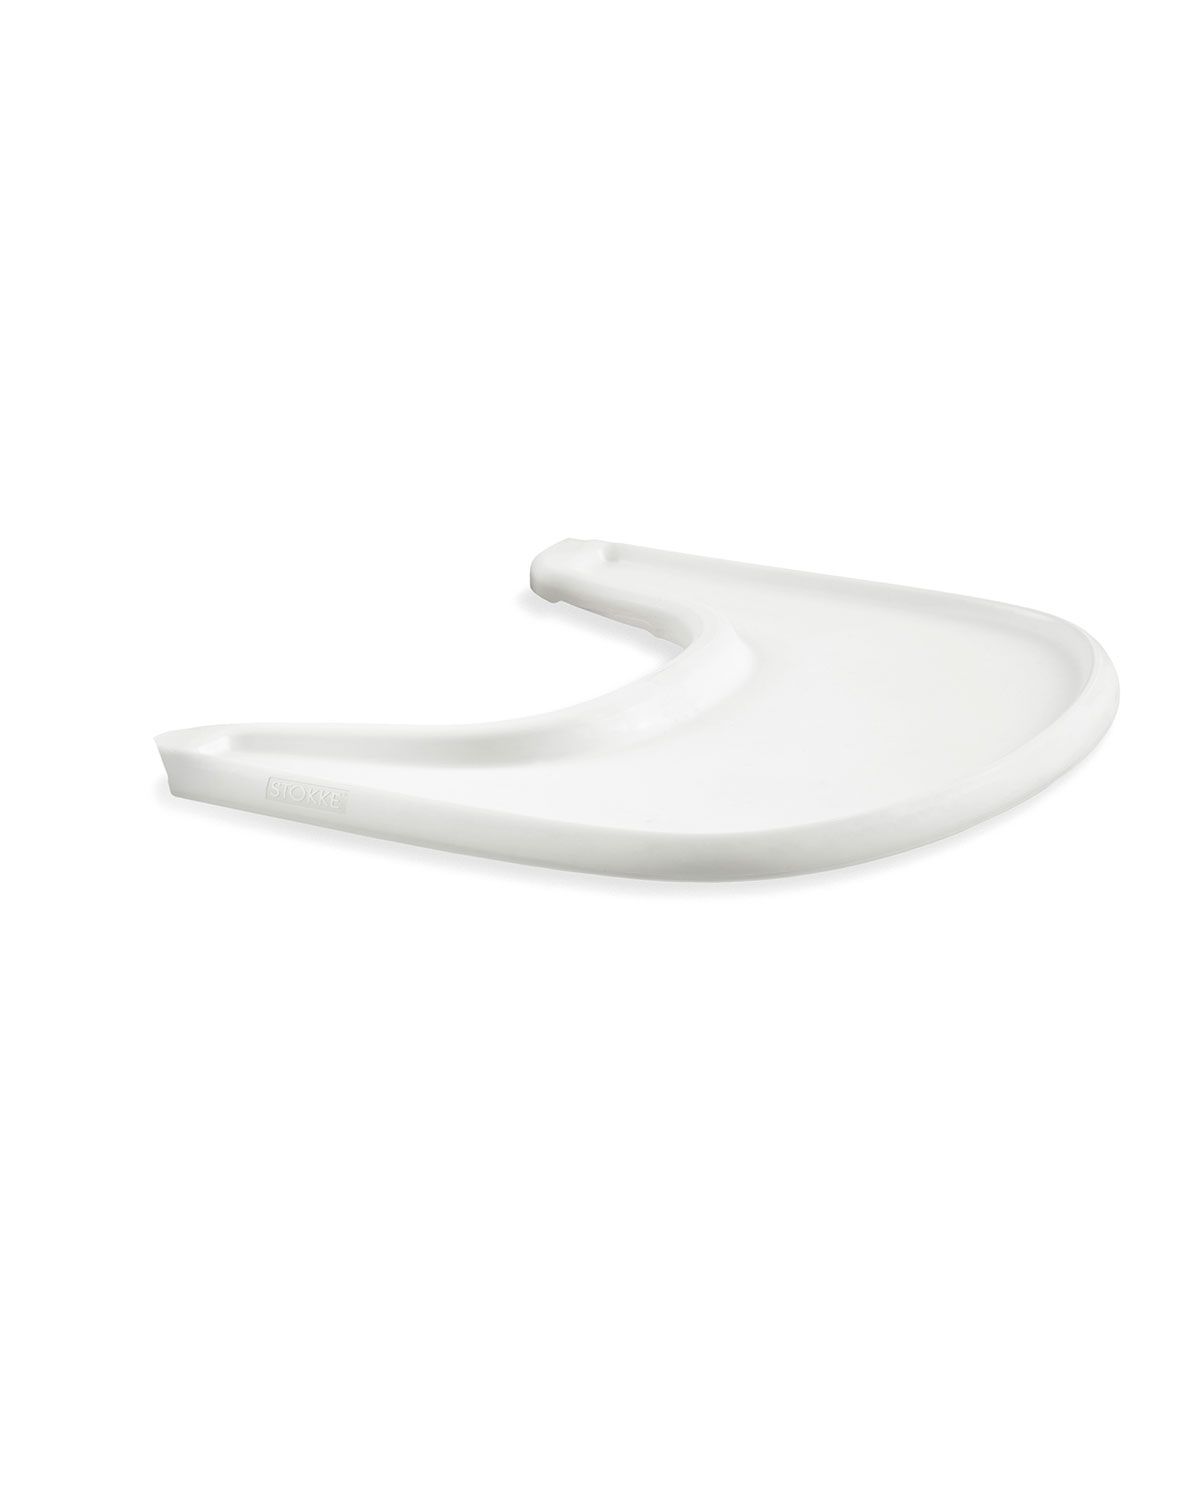 Tray for Use with Tripp Trapp® Chair | Neiman Marcus